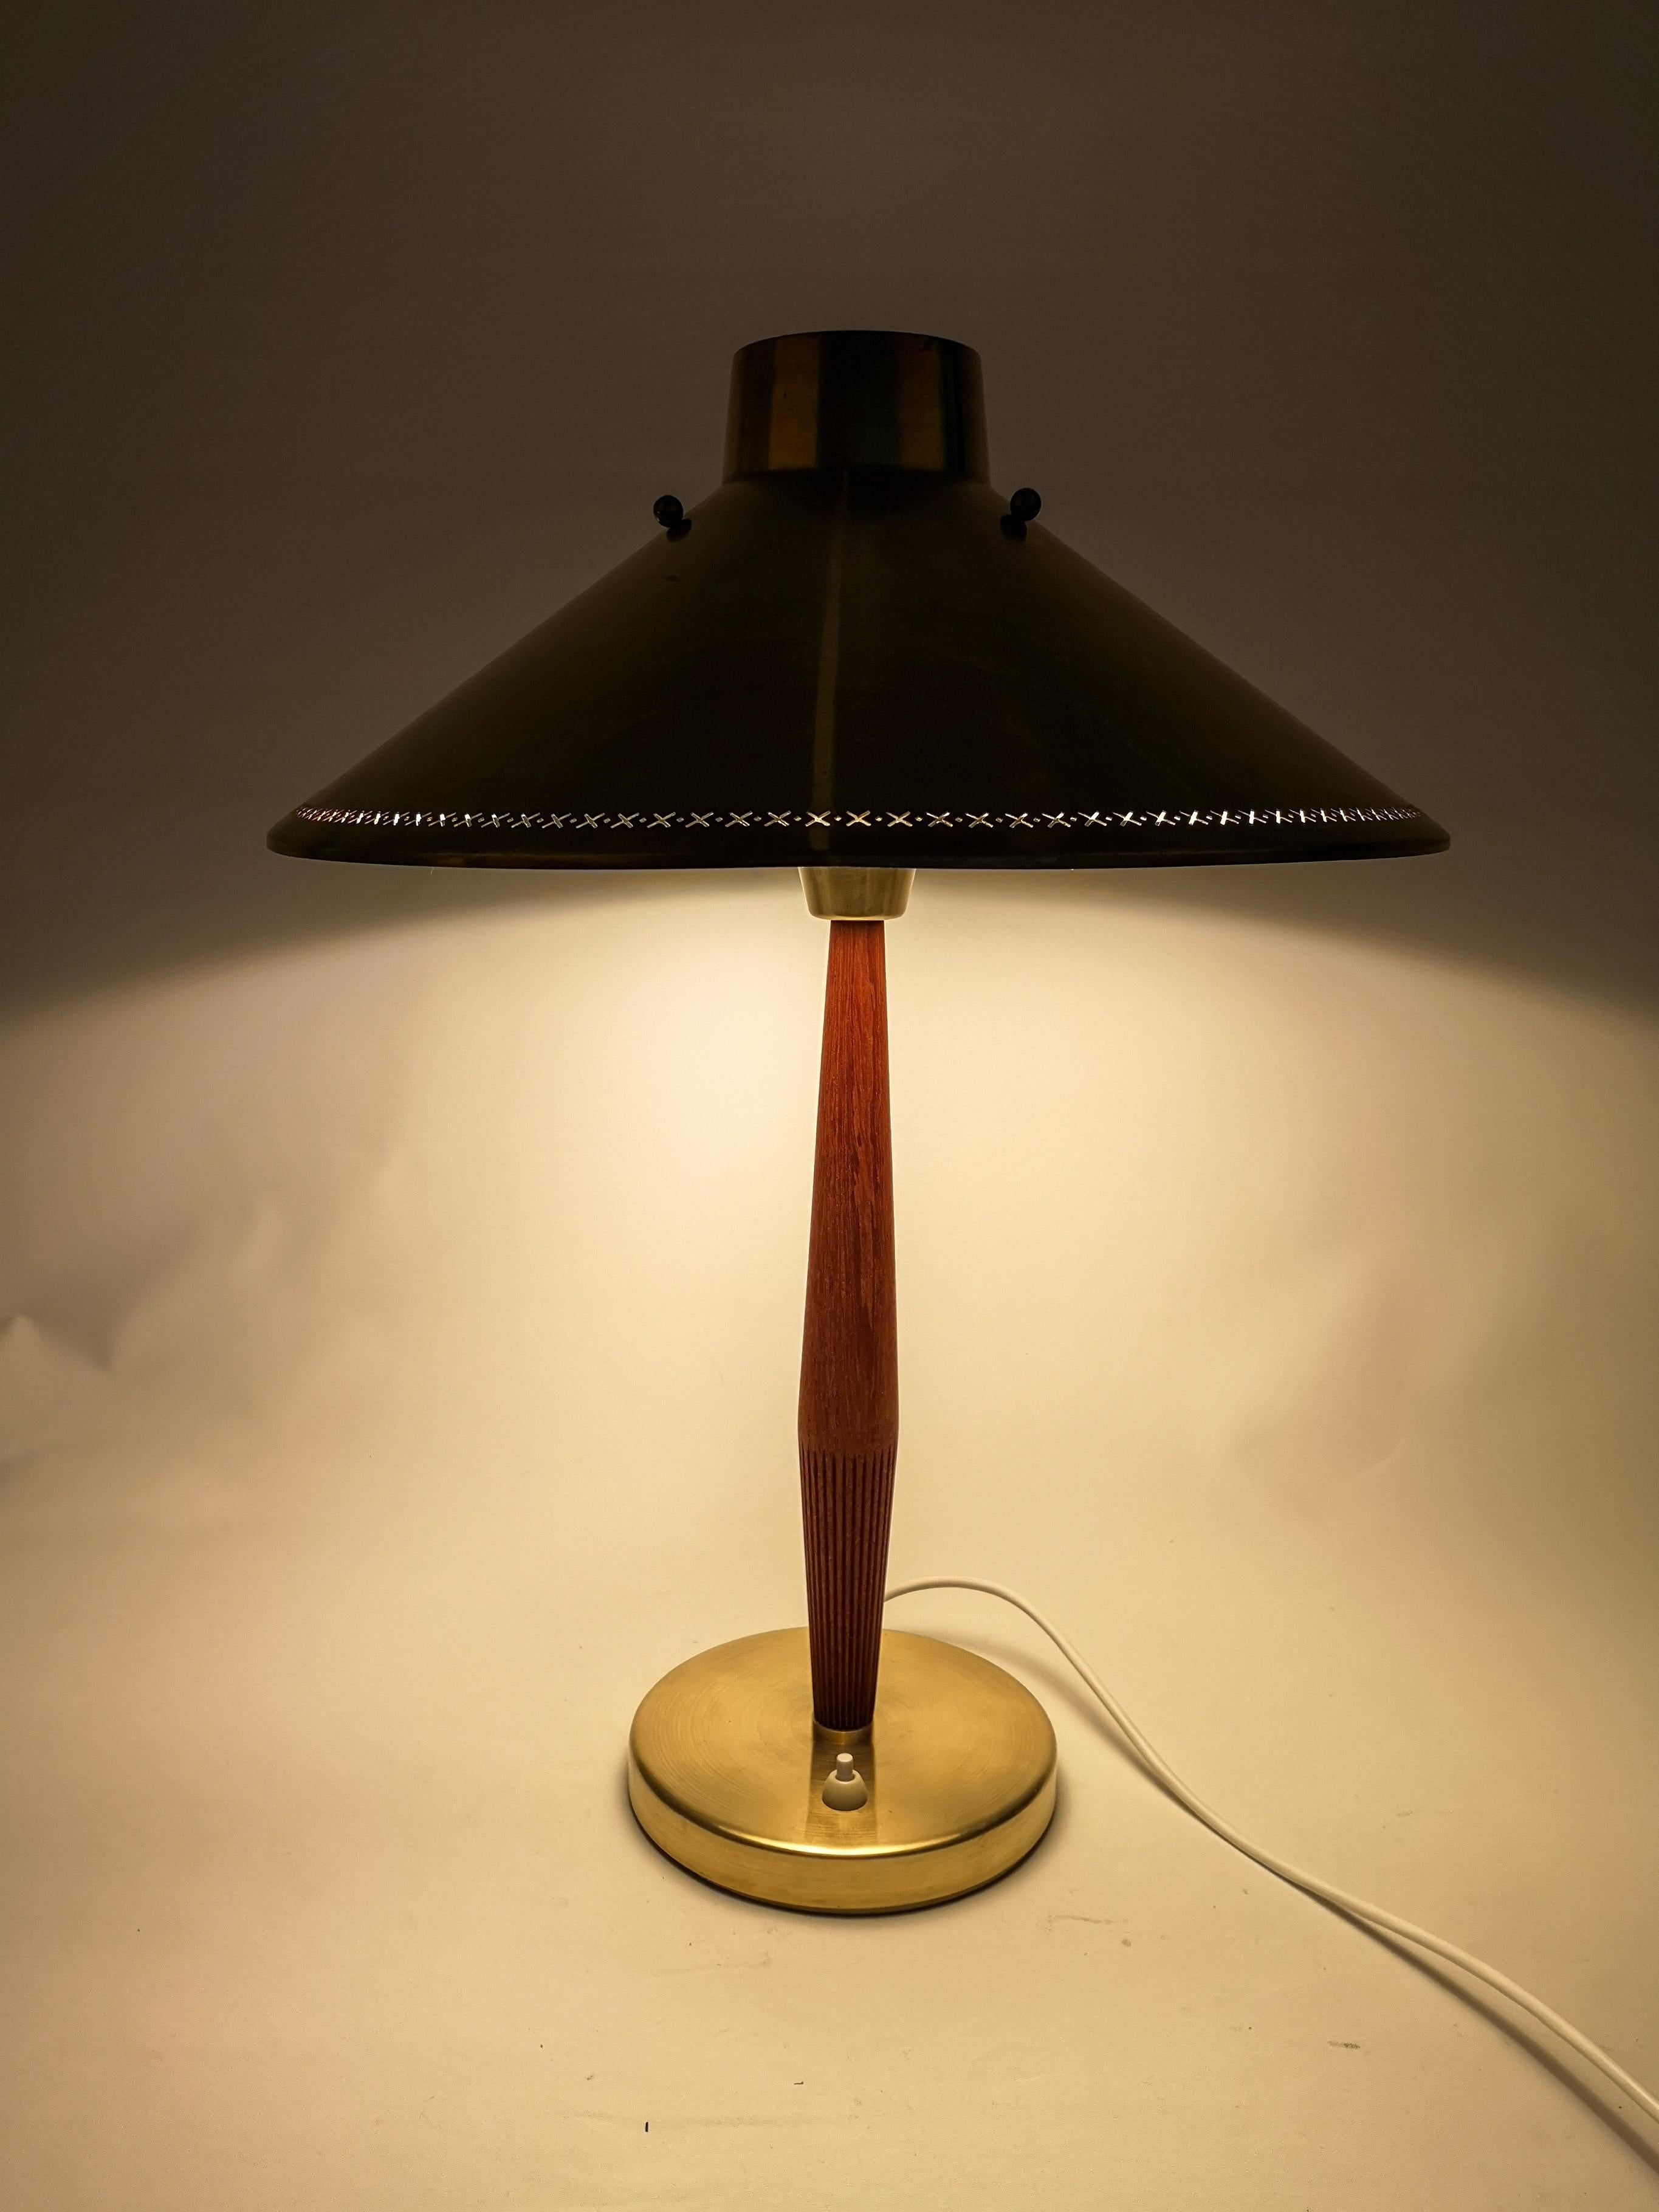 Very nice Swedish table lamp made in 1940 for ASEA and designed by Hans Bergström. Brass with teak in a nice combination. 

Good condition with some wear consistent with age and use

Measurements: H 53 cm, D 40 cm.
 